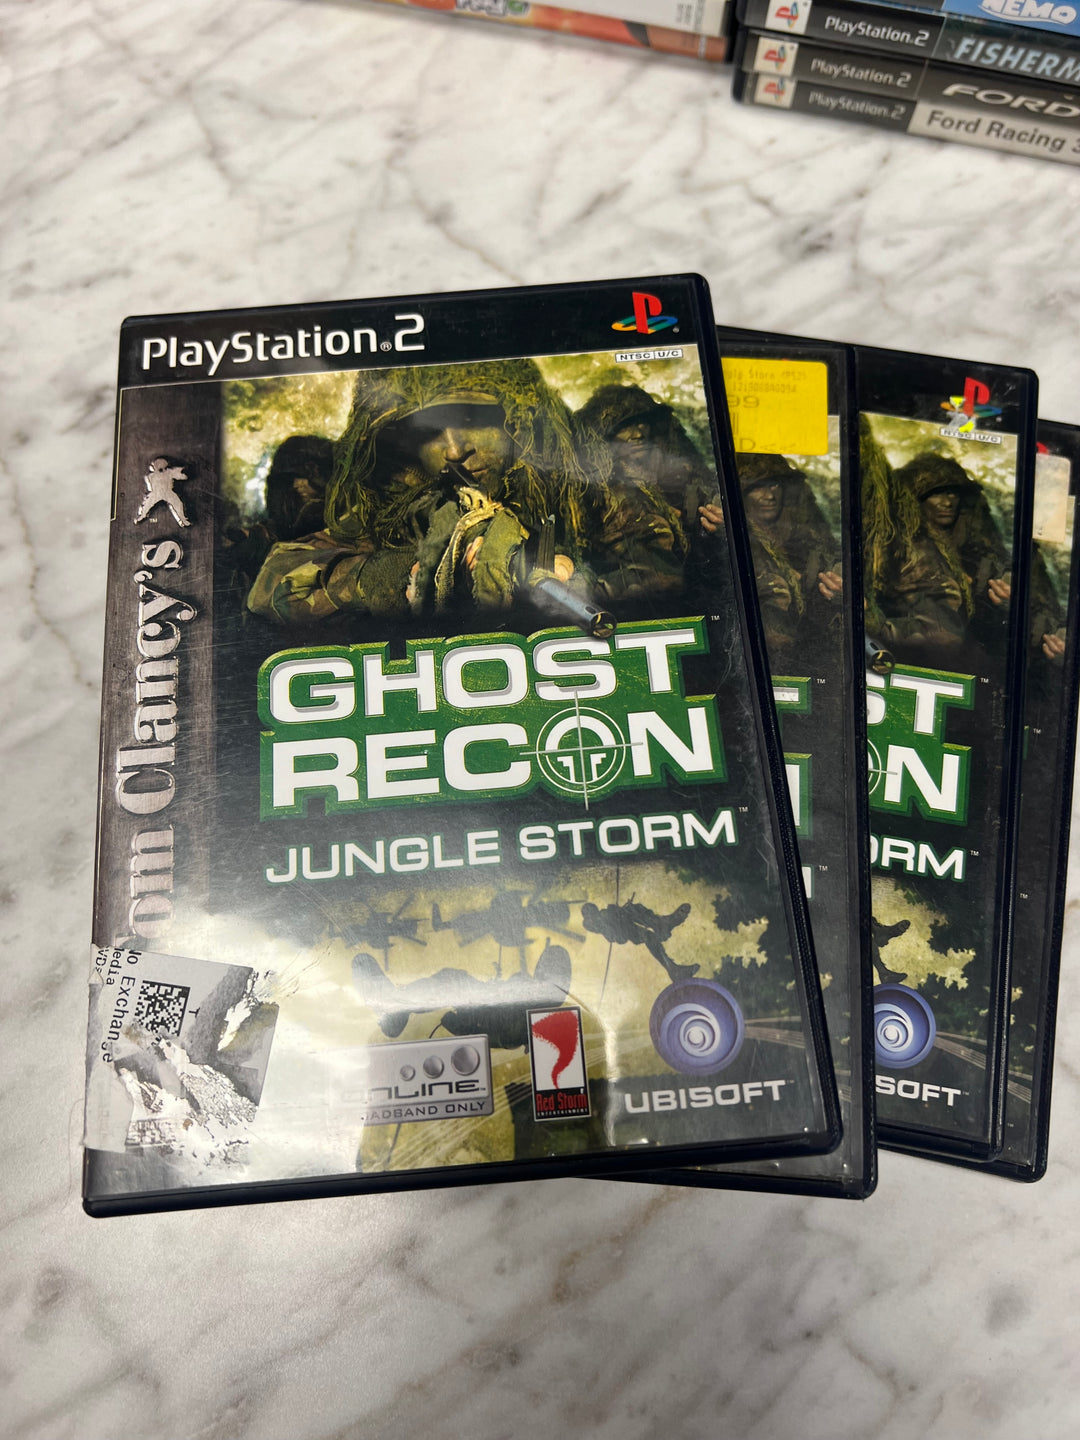 Tom Clancy's Ghost Recon Jungle Storm for Playstation 2 PS2 in case. Tested and Working.     DO62924